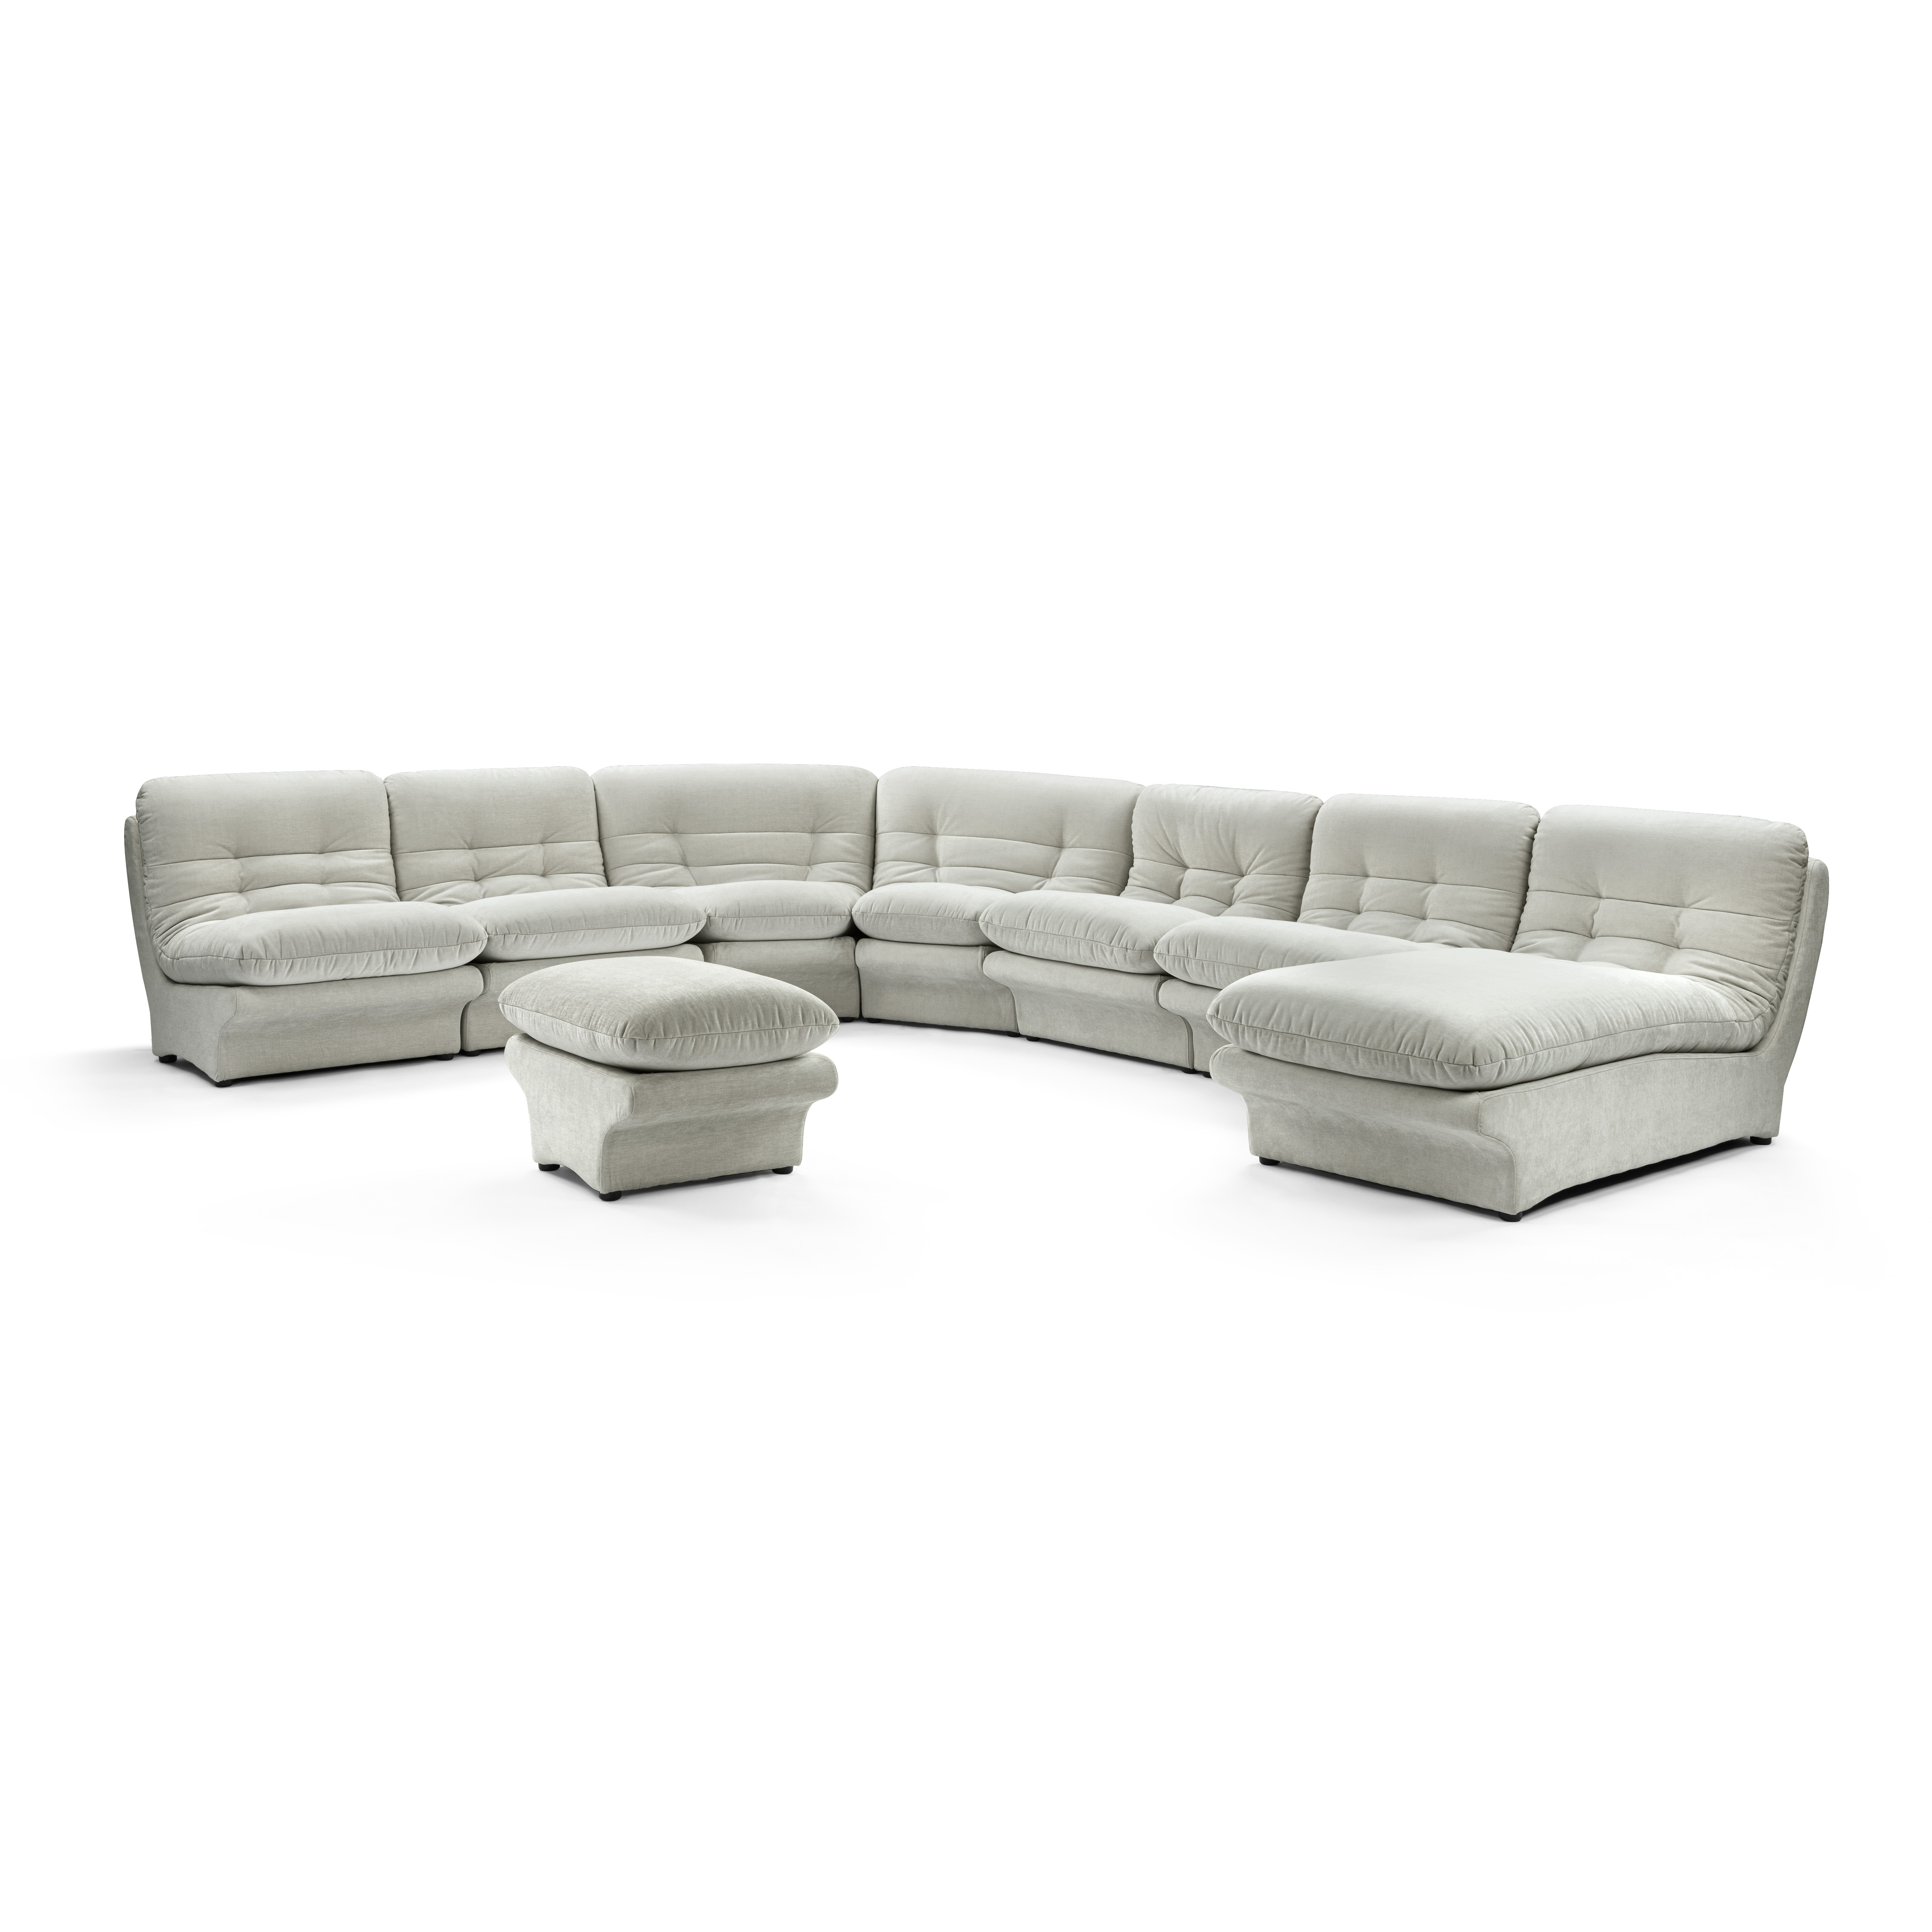 Carsons Mid Century Curved Modular Sectional Sofa / Combination 001-Chenille Helios-Feathered Beige Grey